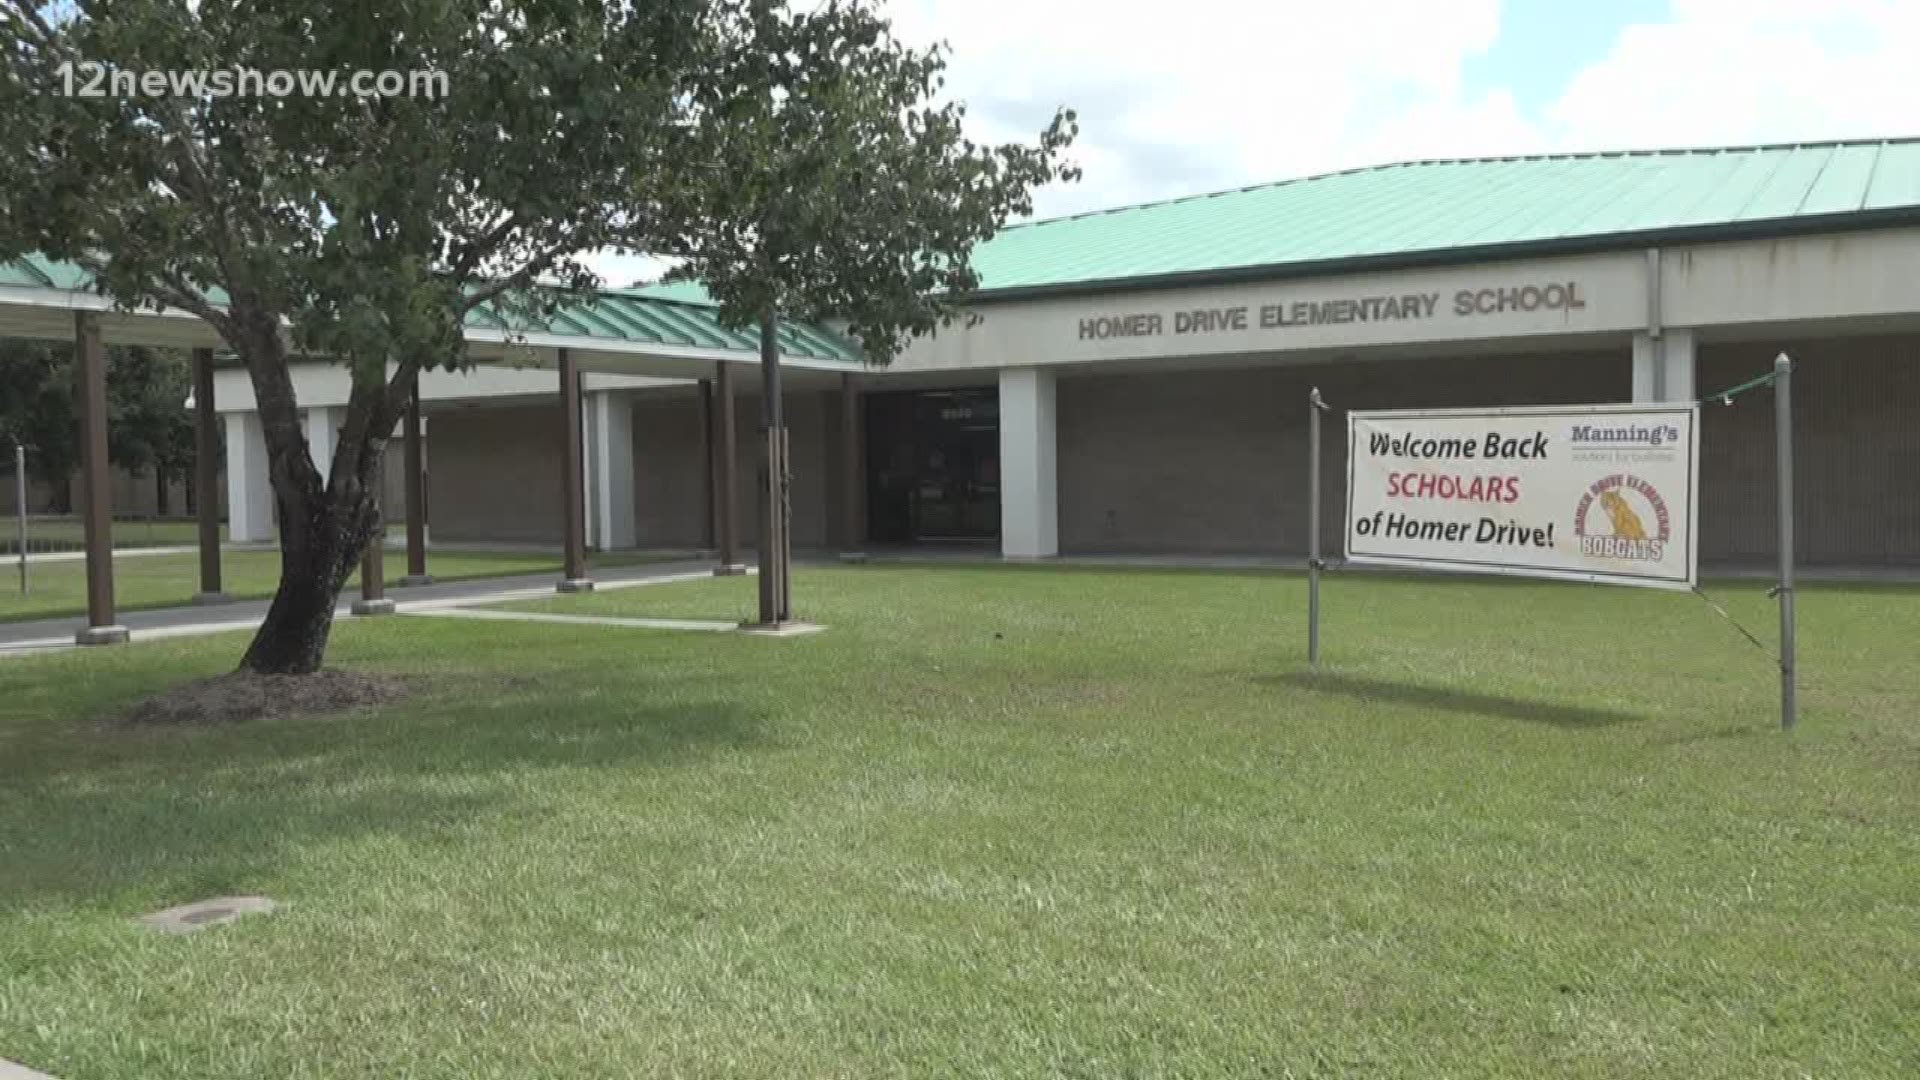 An investigation is underway after video was posted to YouTube and Facebook showing a woman hitting a young child with a belt at Homer Drive Elementary School.